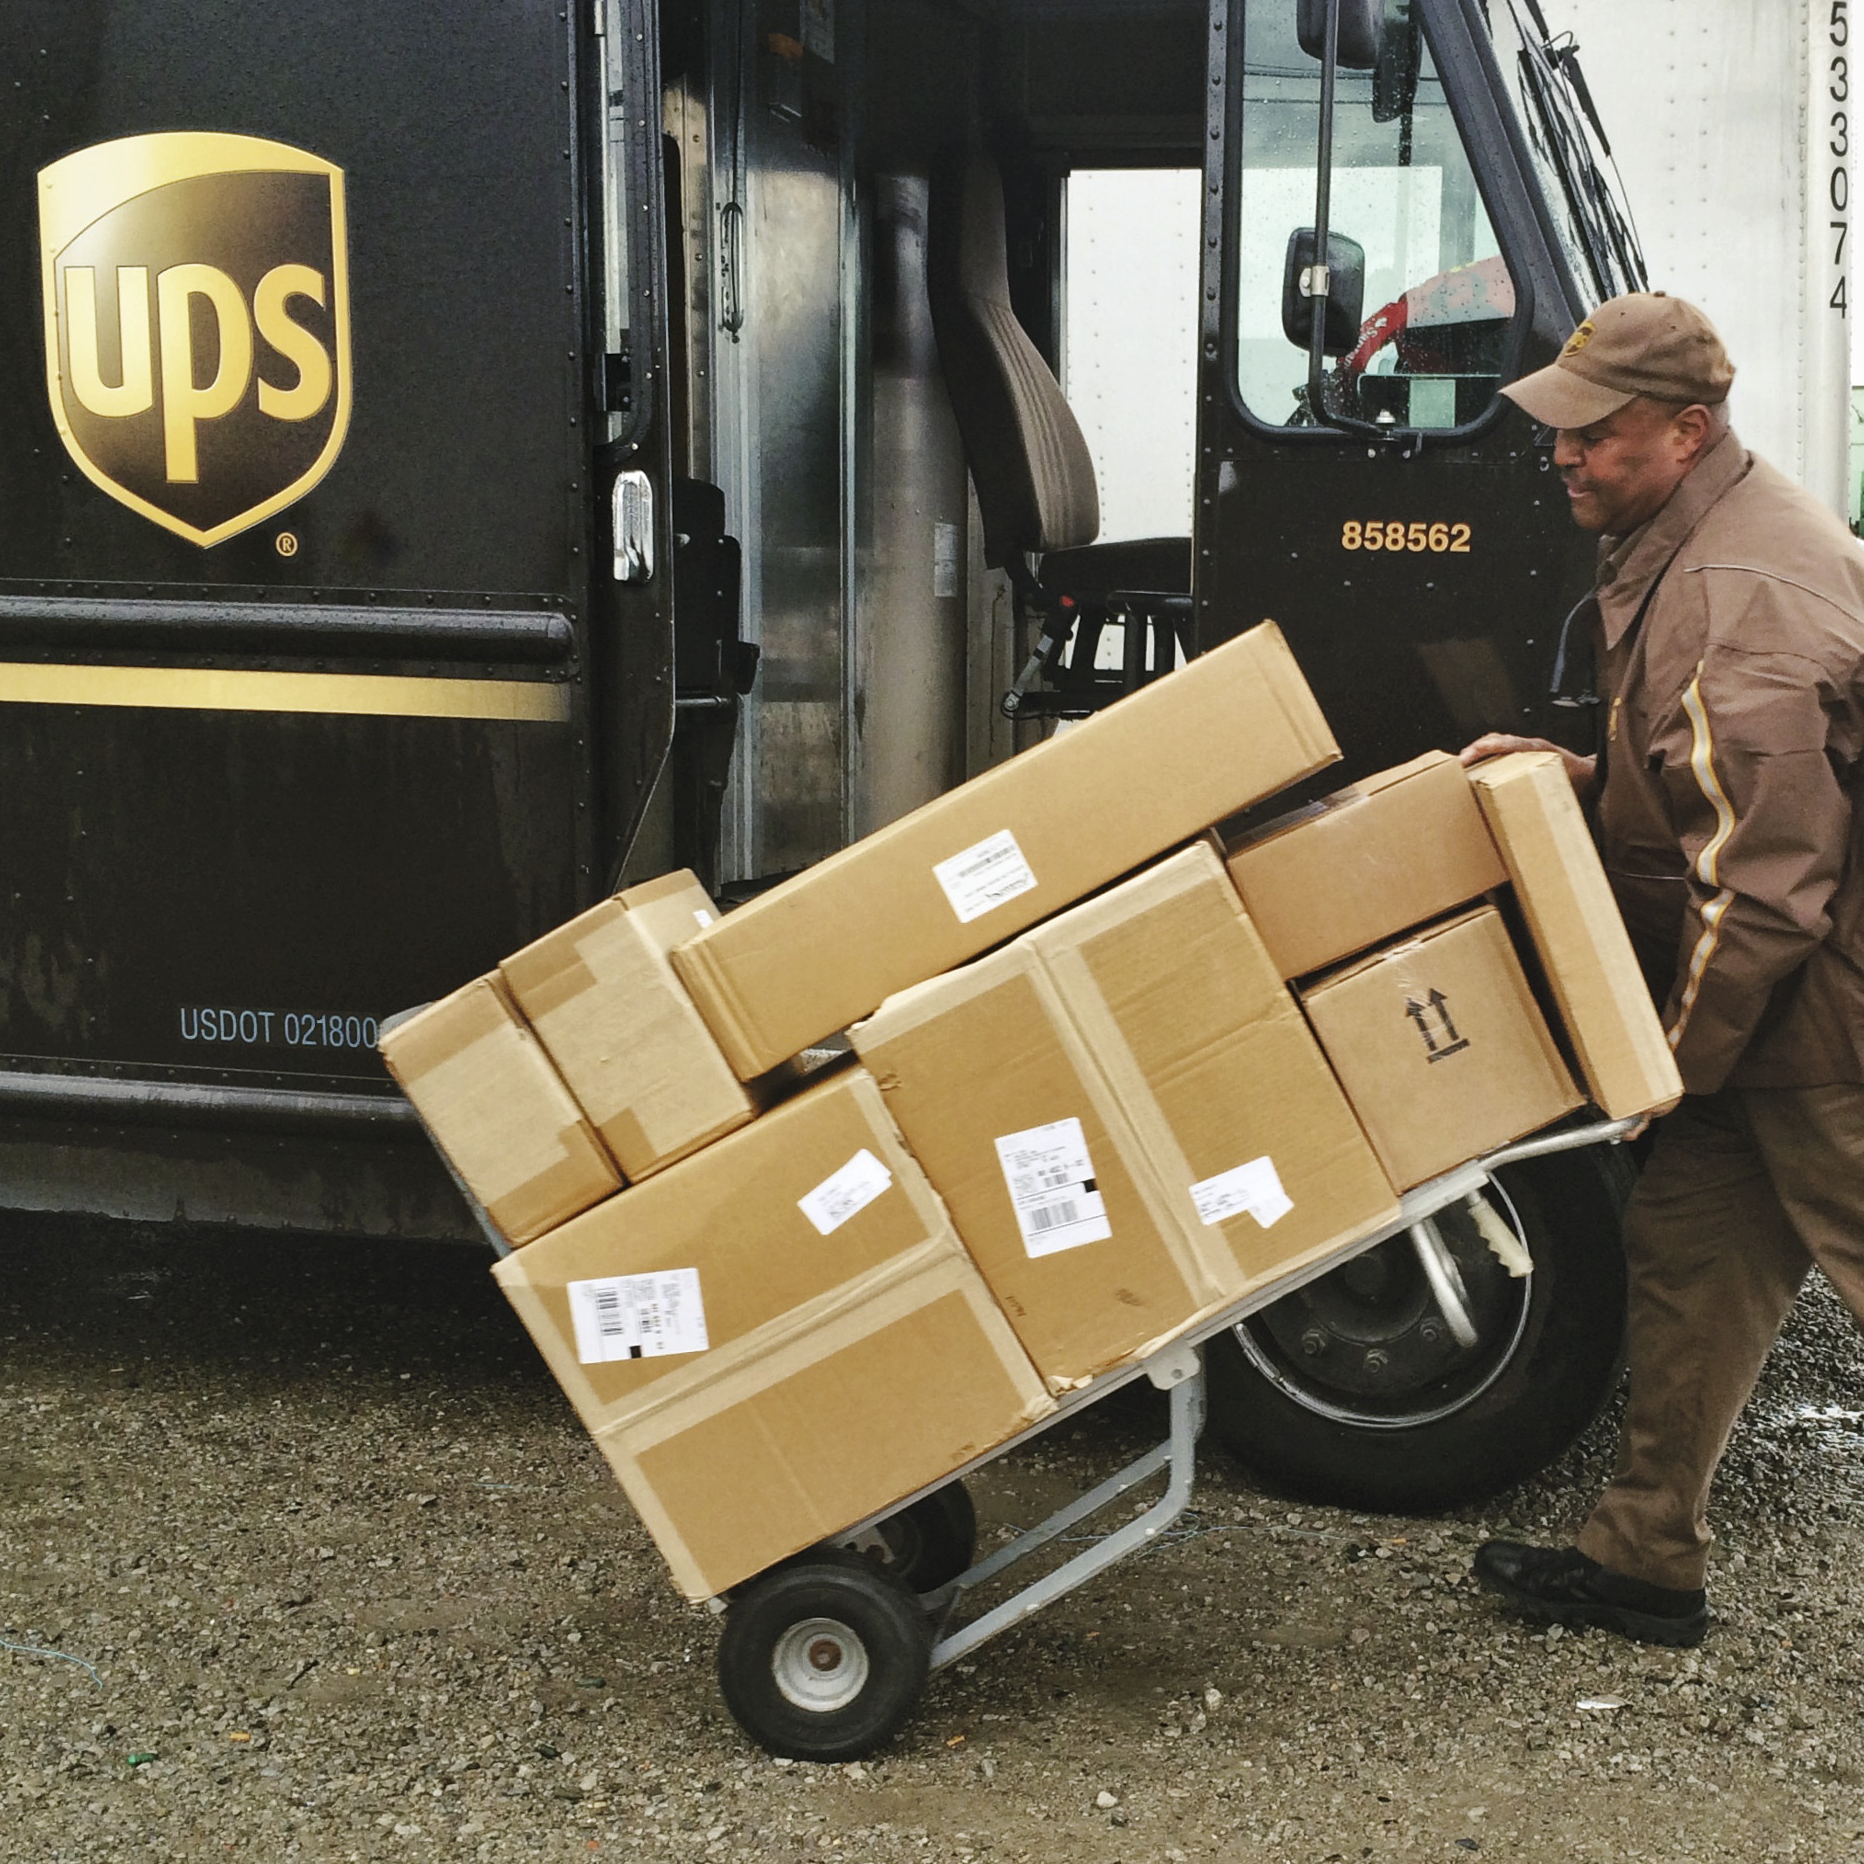 UPS driver pushing boxes on a dolley, in front of the UPS truck